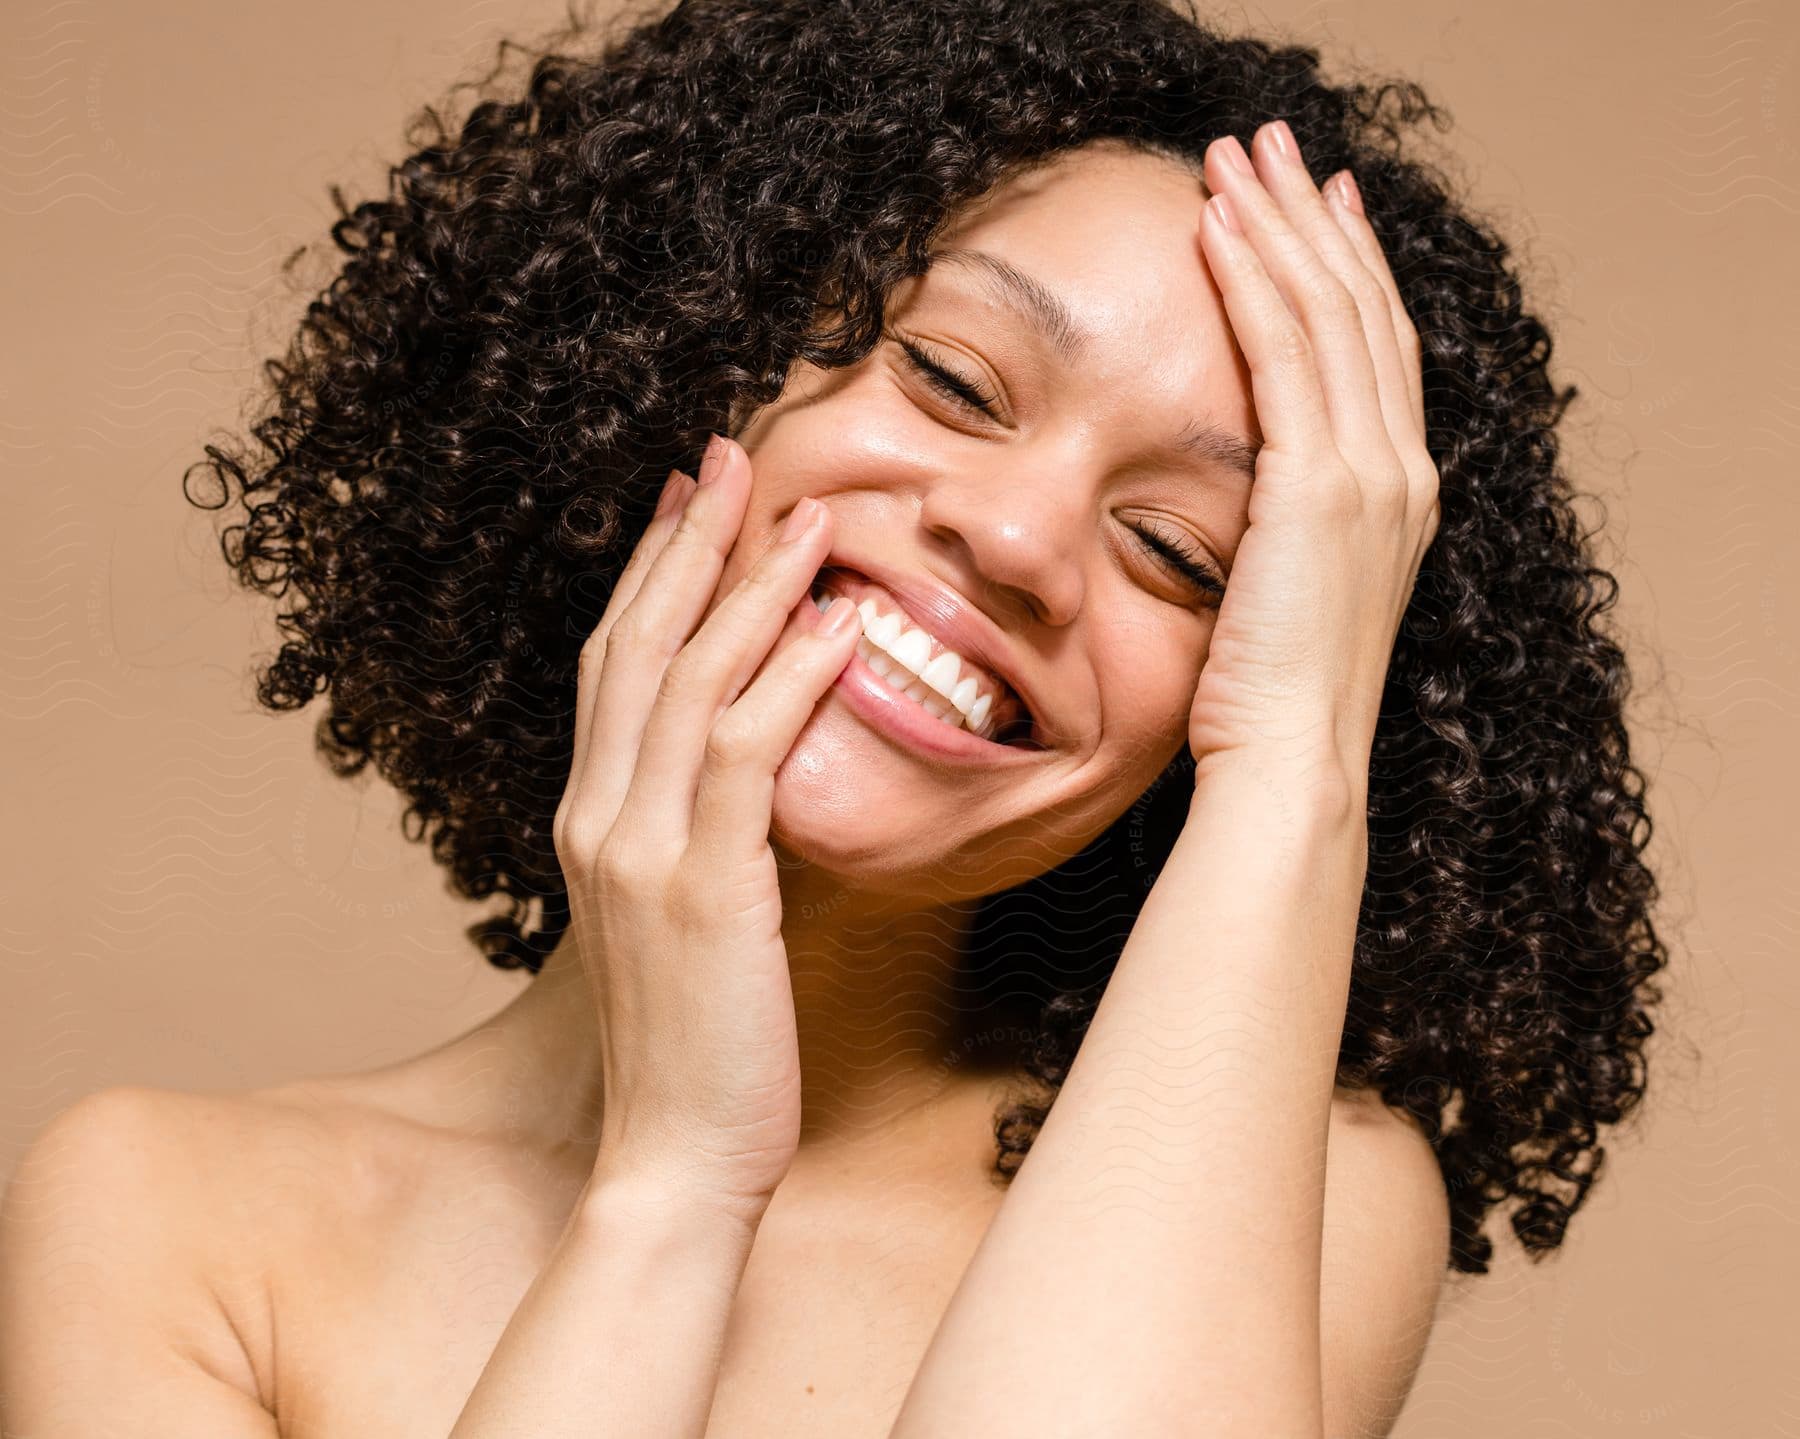 Portrait of a woman with curly black hair and smiling with her hands on her face.